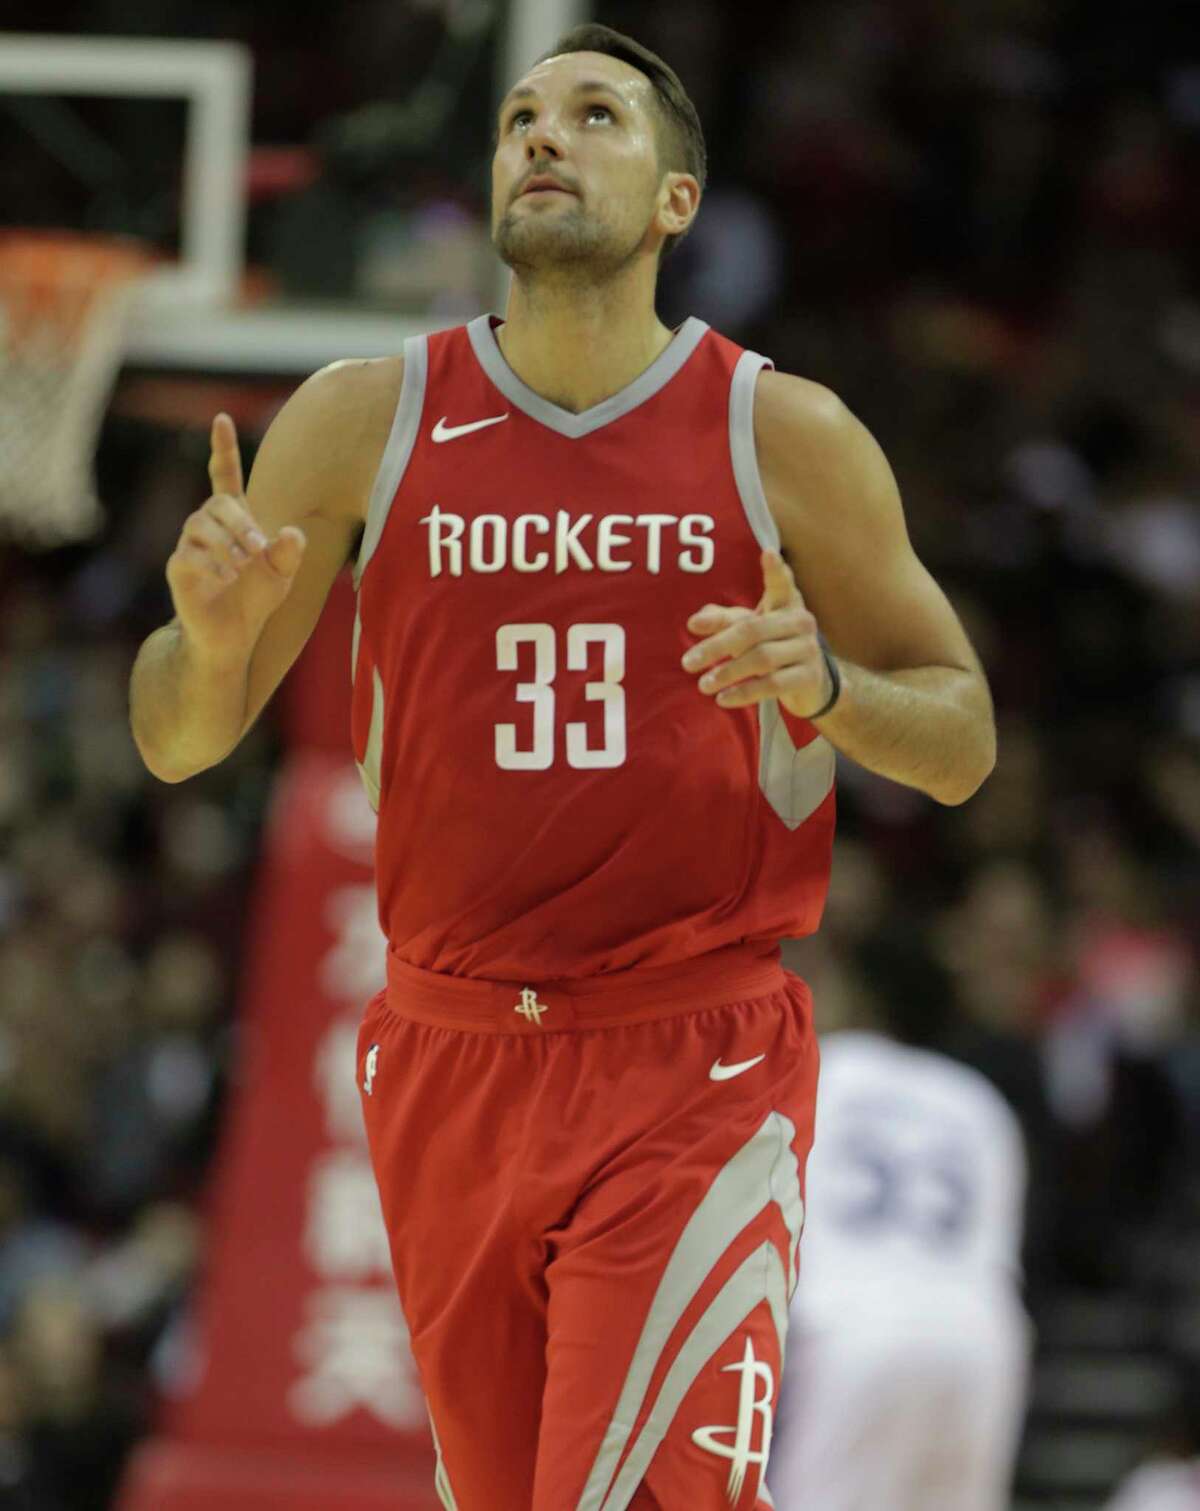 Rockets forward Ryan Anderson came off the bench in Saturday's win over the New York Knicks, and that could be something that happens more often as the season goes along.